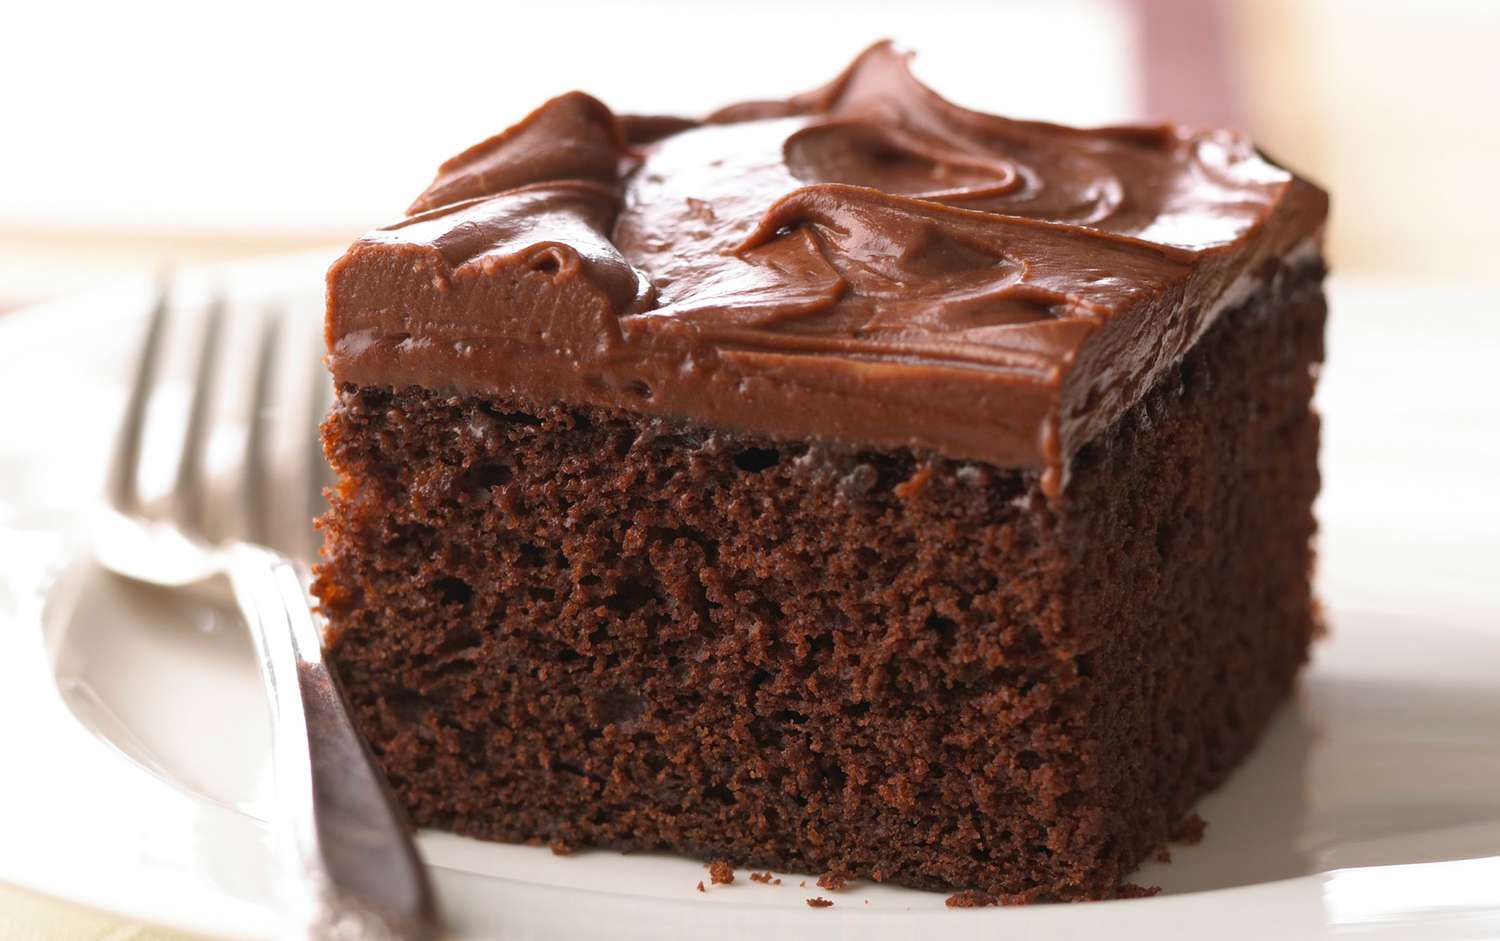 piece of chocolate cake with chocolate frosting